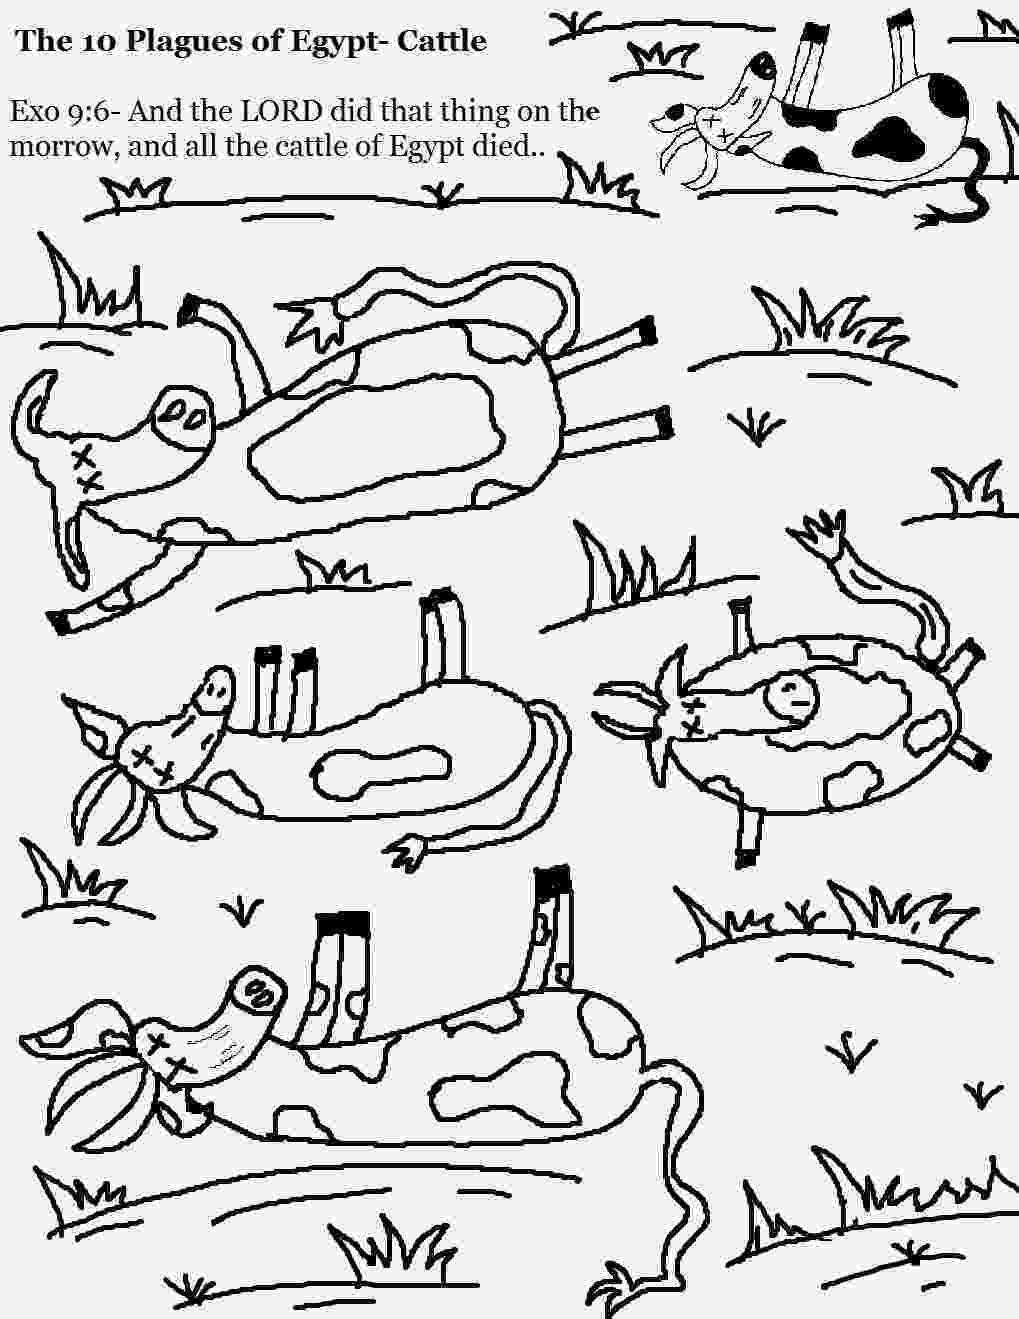 ten plagues of egypt coloring pages the ten plagues of egypt coloring page wecoloringpagecom ten egypt coloring pages of plagues 